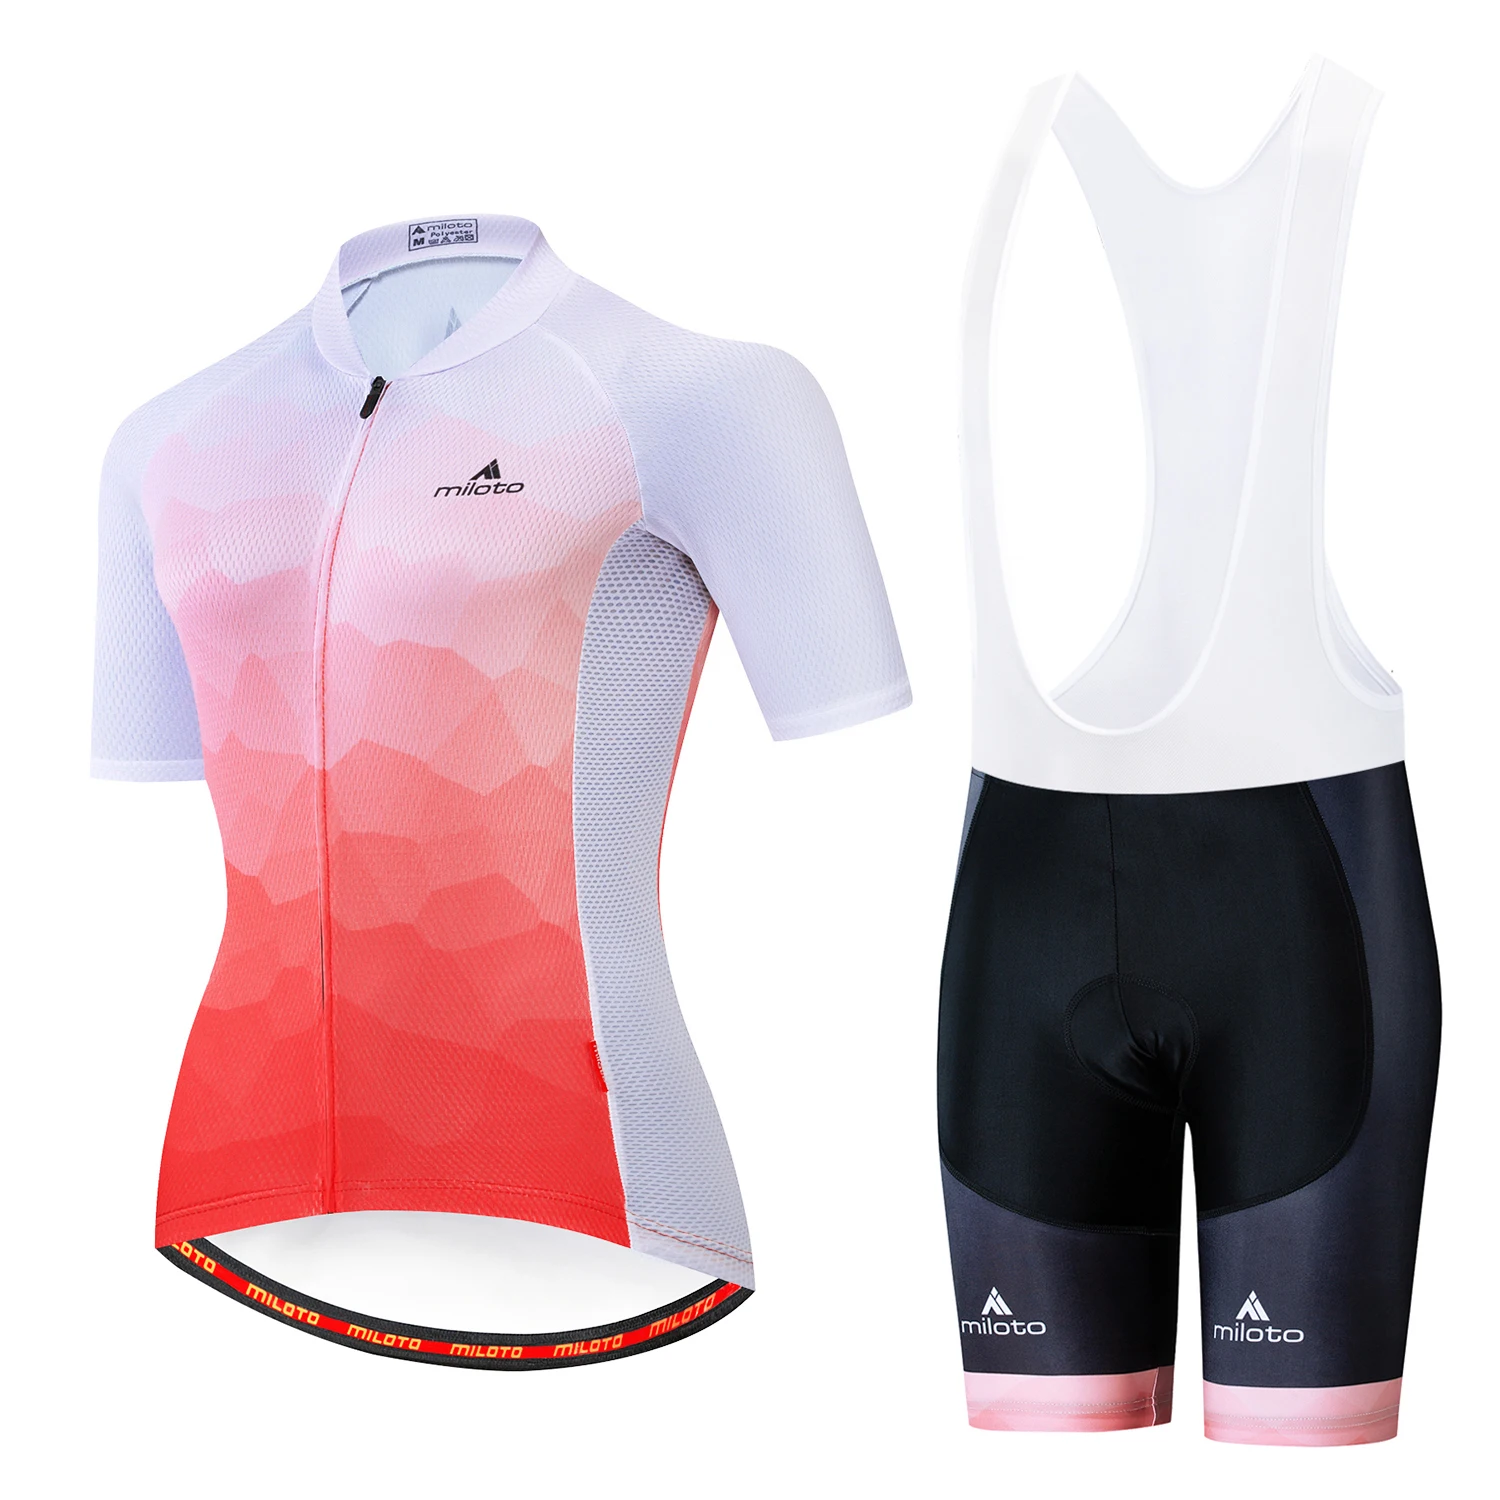 miloto-women's-short-sleeve-cycling-jersey-with-bib-shorts-bike-breathable-sports-patterned-mountain-bike-mtb-road-clothing-sets